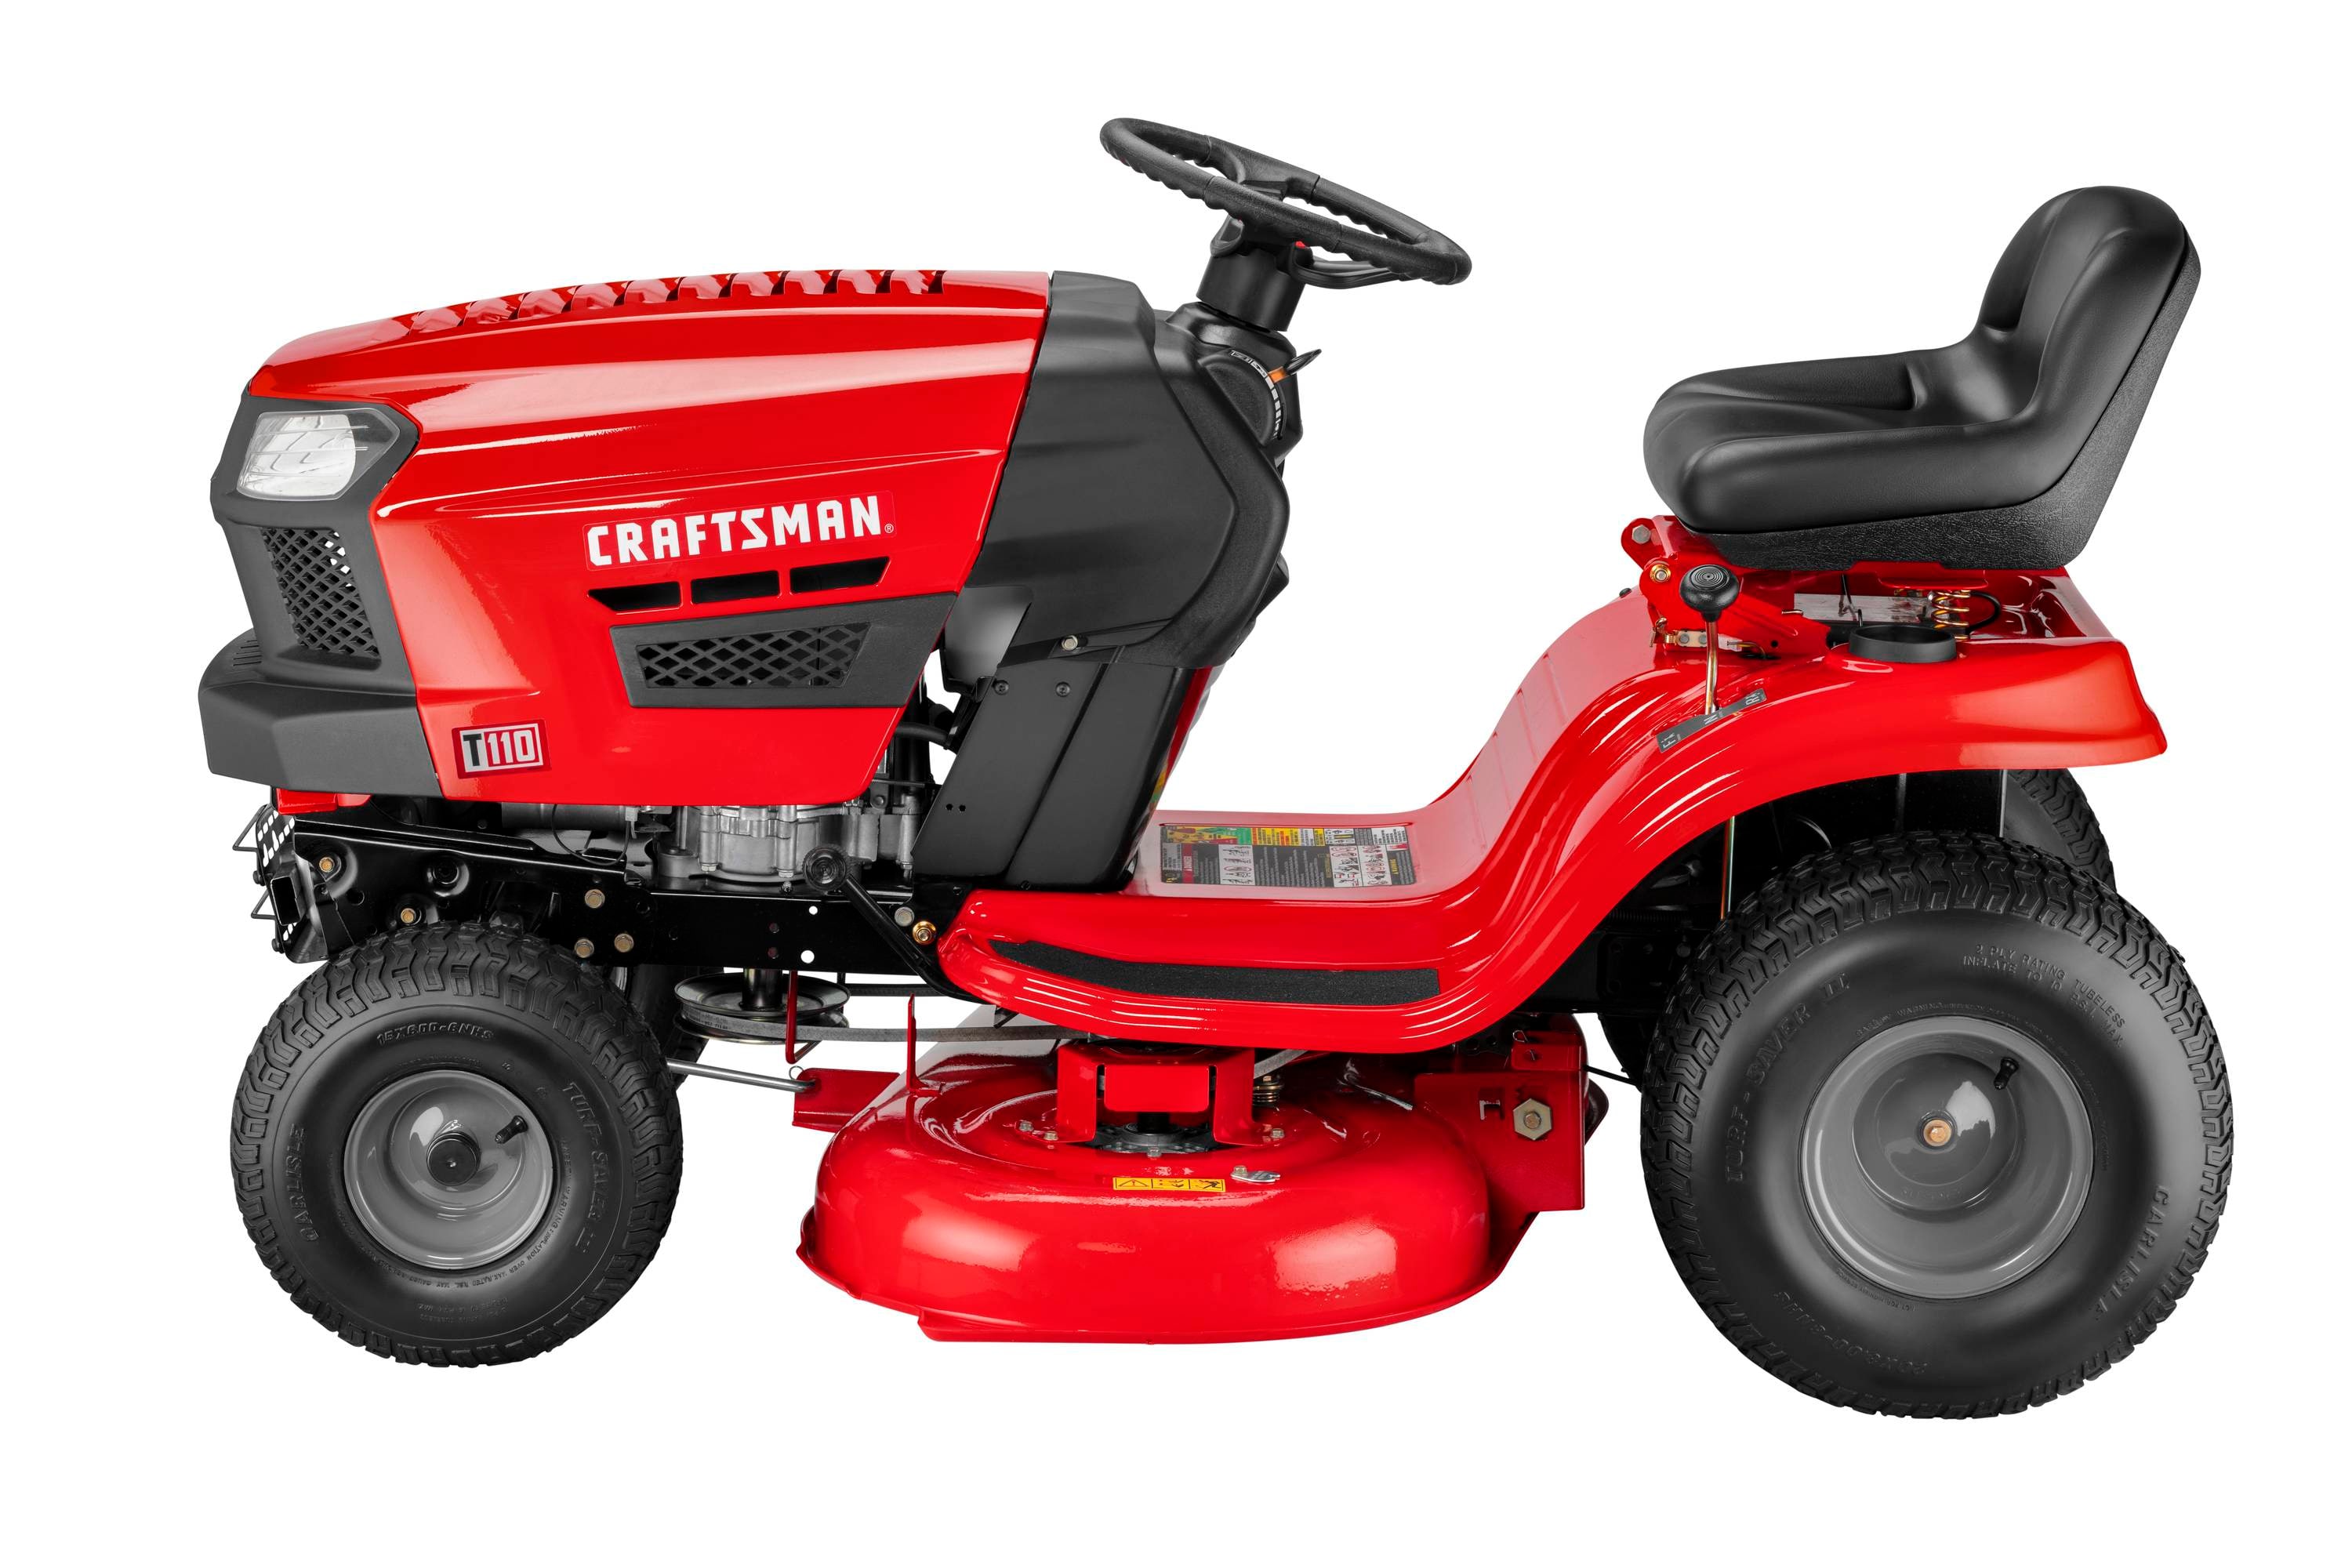 Craftsman electric riding lawnmower review: Is it worth it?